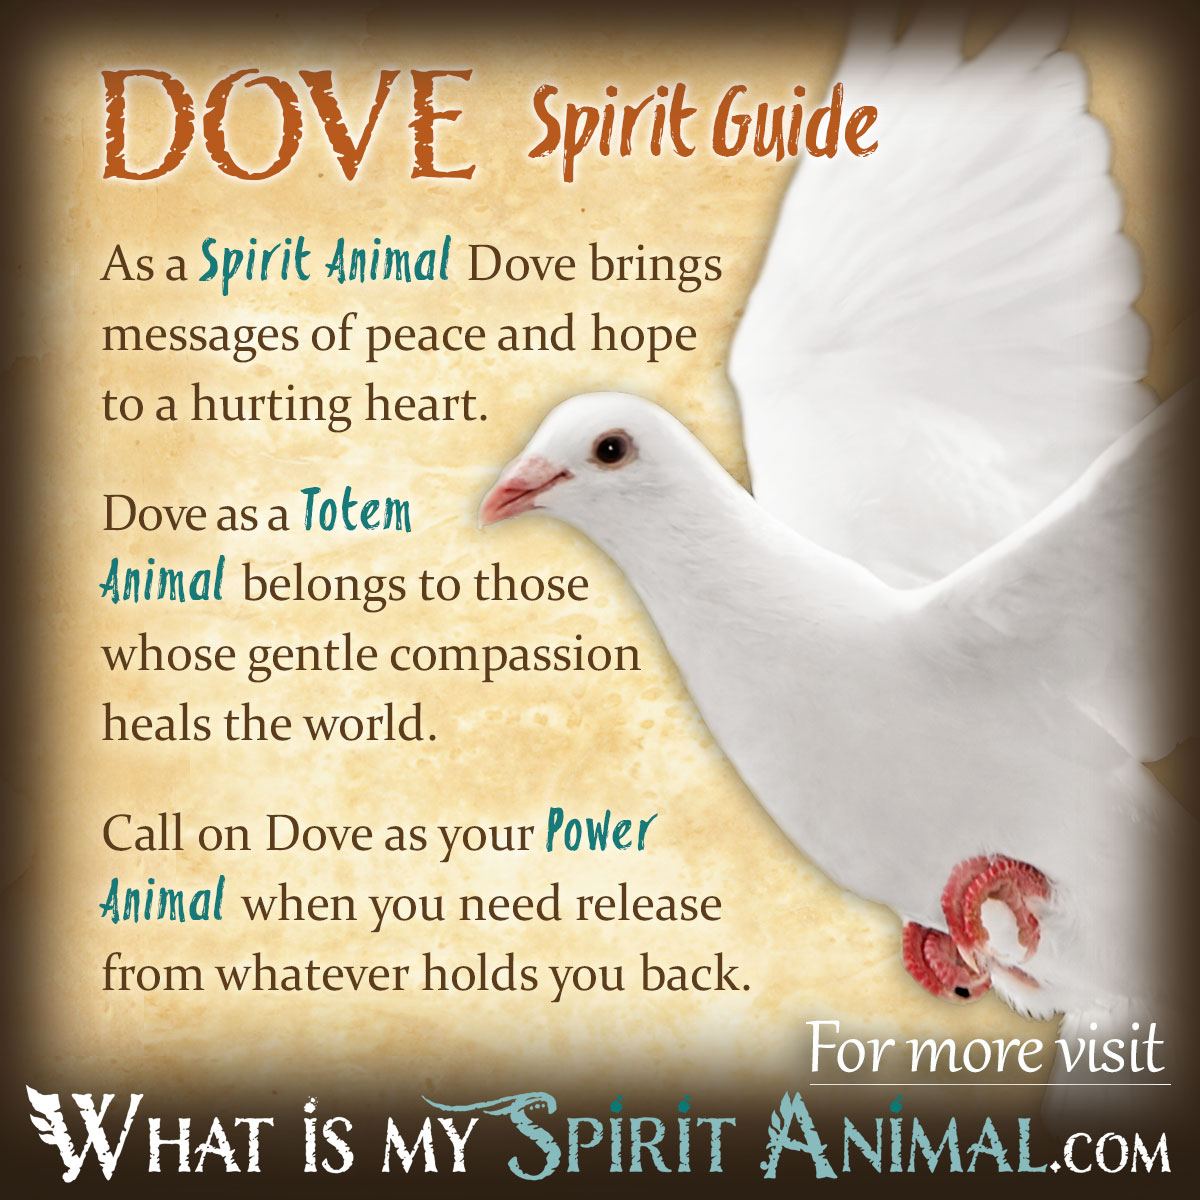 Why does a dove symbolize hope?